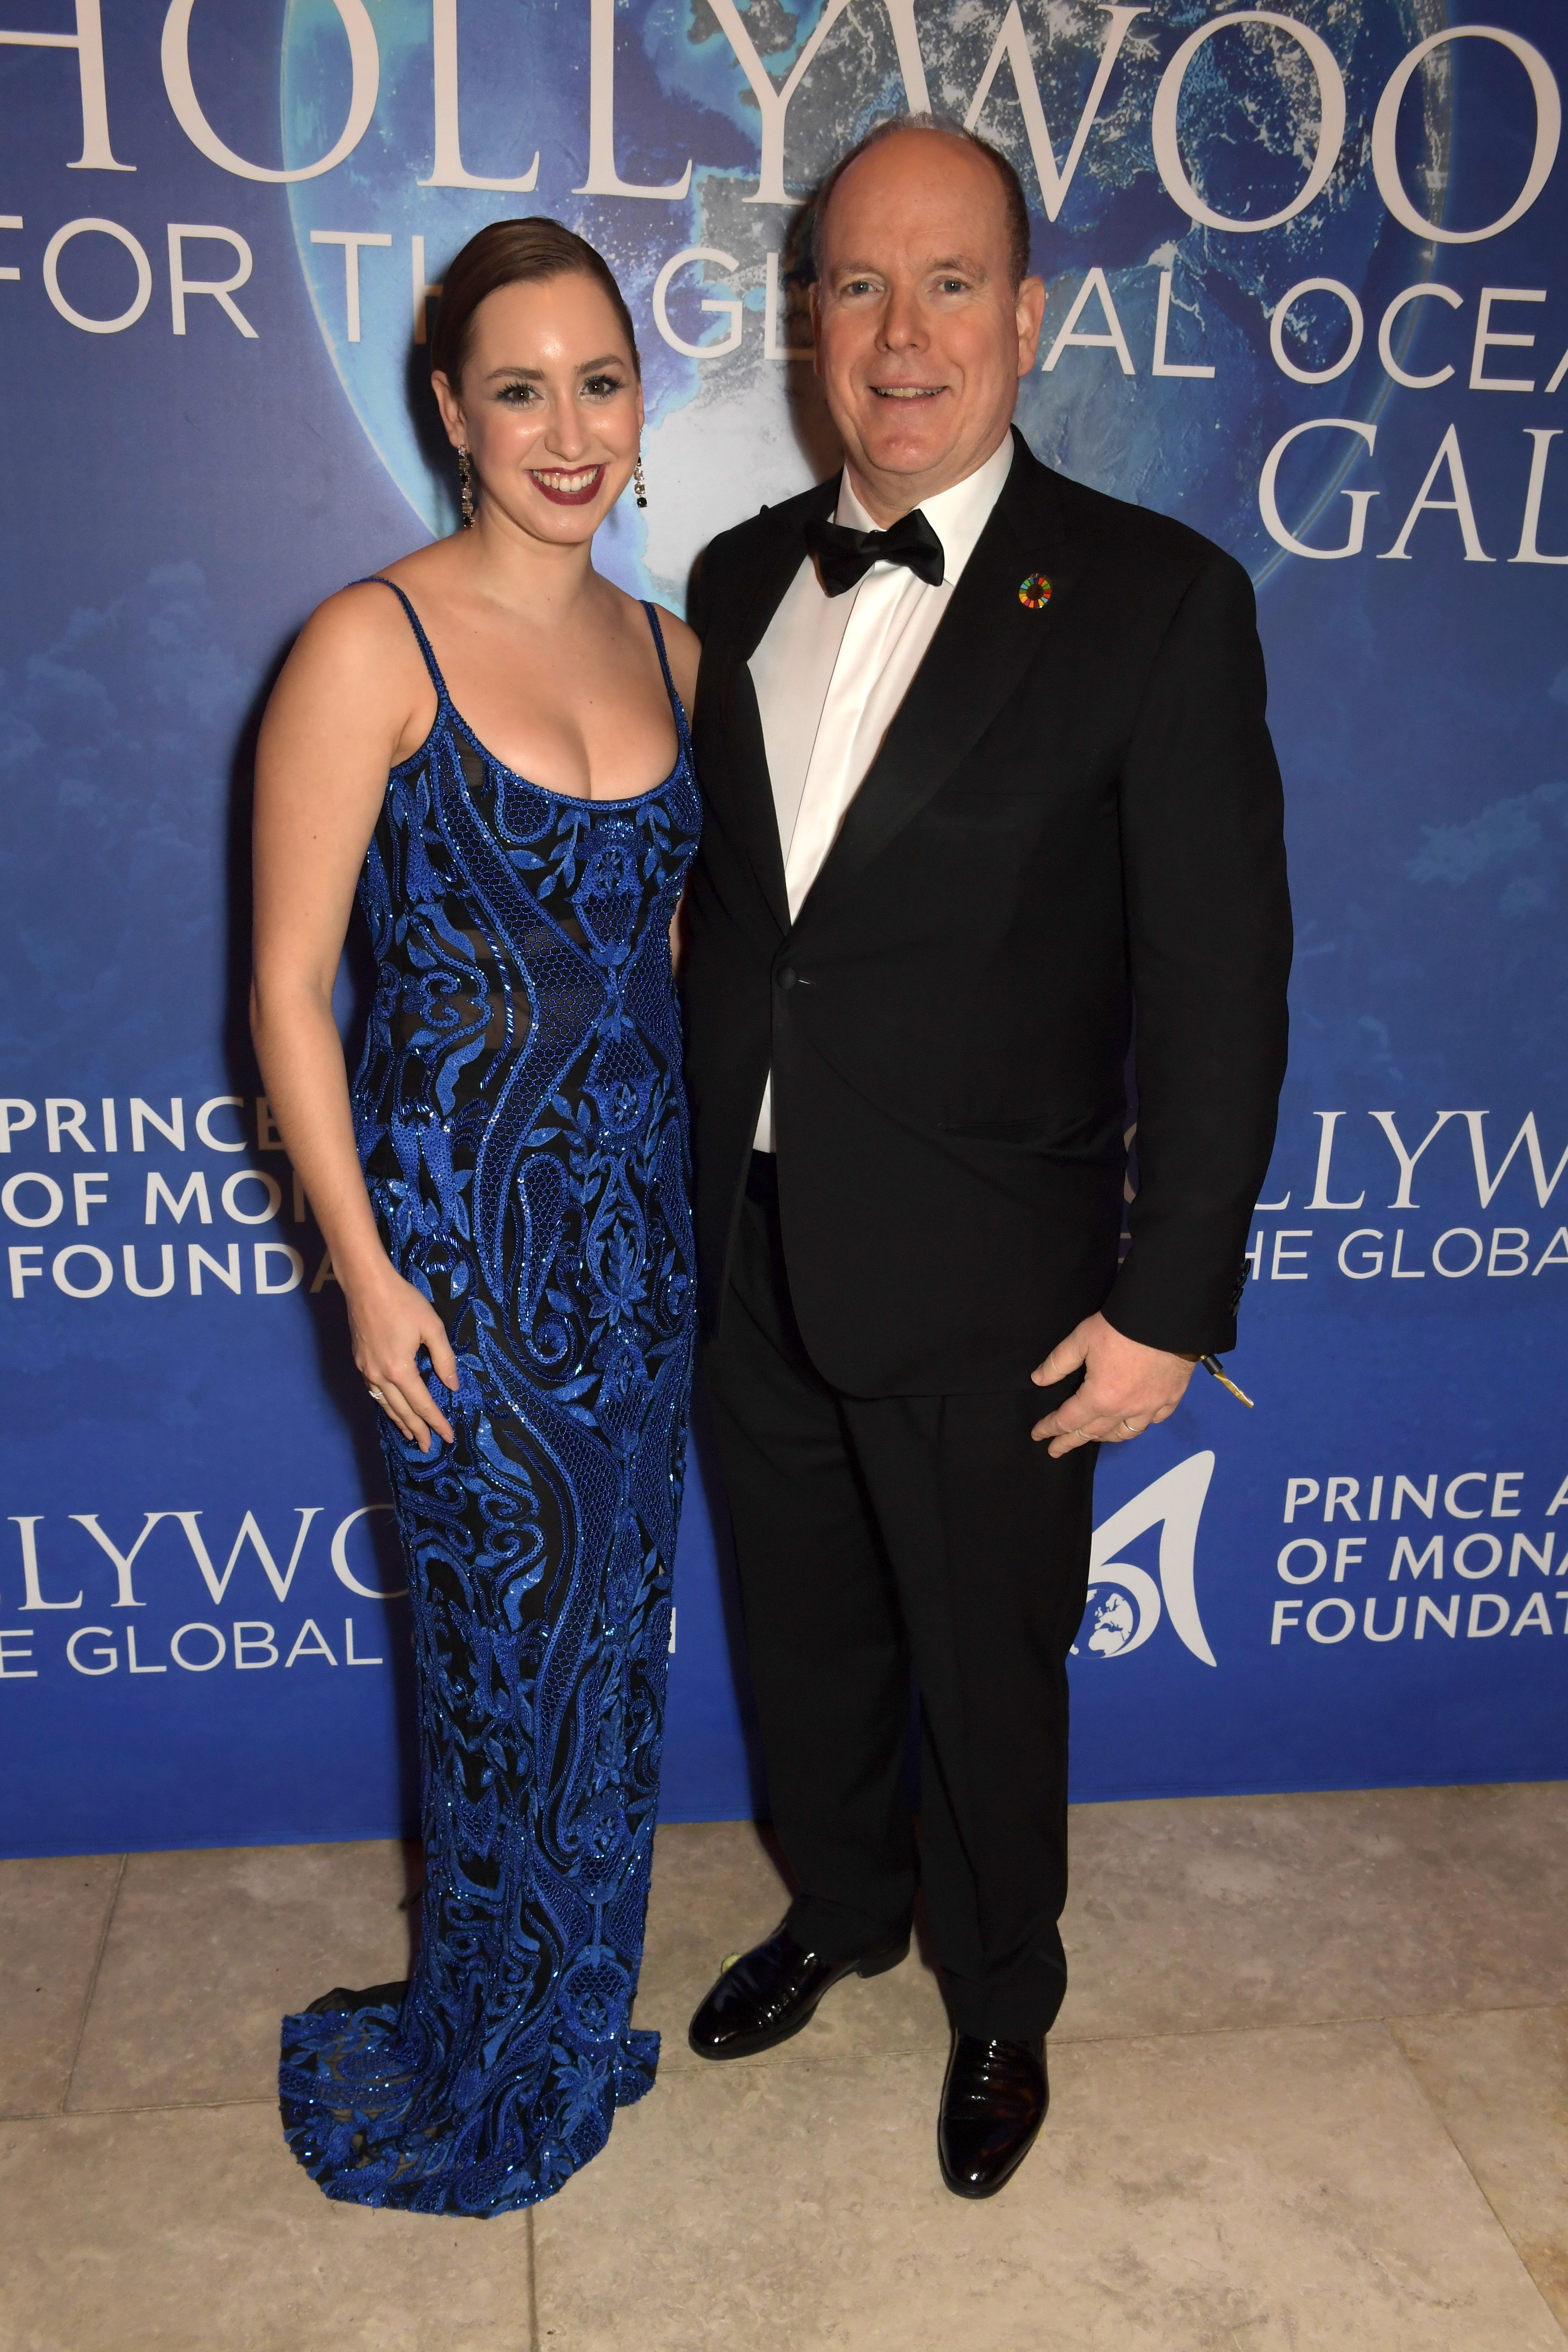 Jazmin Grace Grimaldi and Prince Albert II of Monaco attend the 2020 Hollywood For The Global Ocean Gala honoring HSH Prince Albert II of Monaco at Palazzo di Amore on February 06, 2020 in Beverly Hills, California. | Source: Getty Images